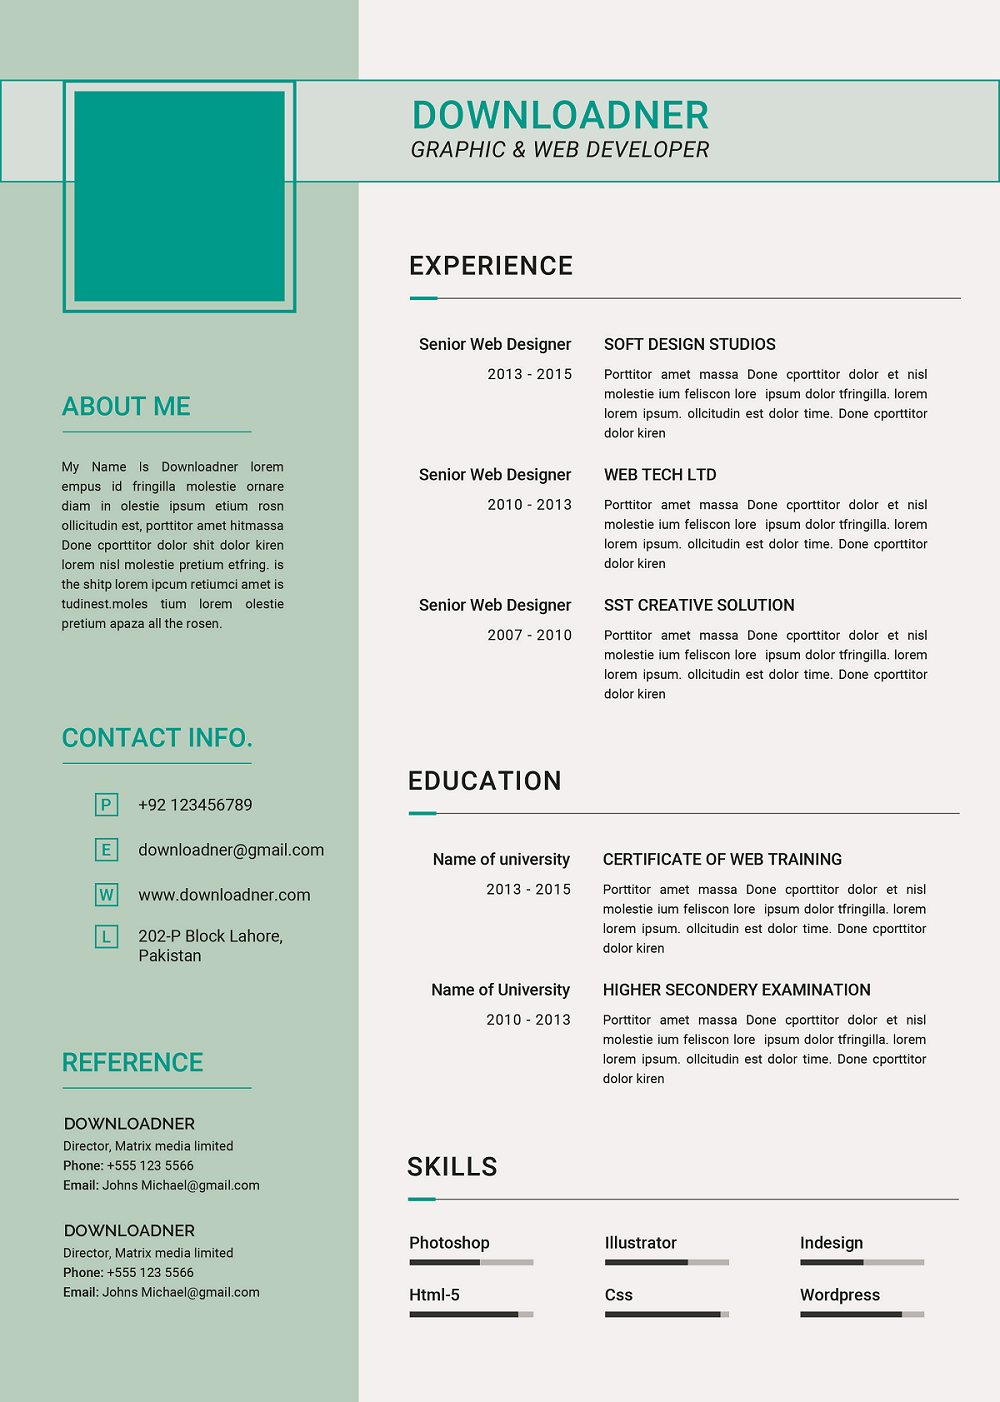 Green and White Resume and CV Design in PSD